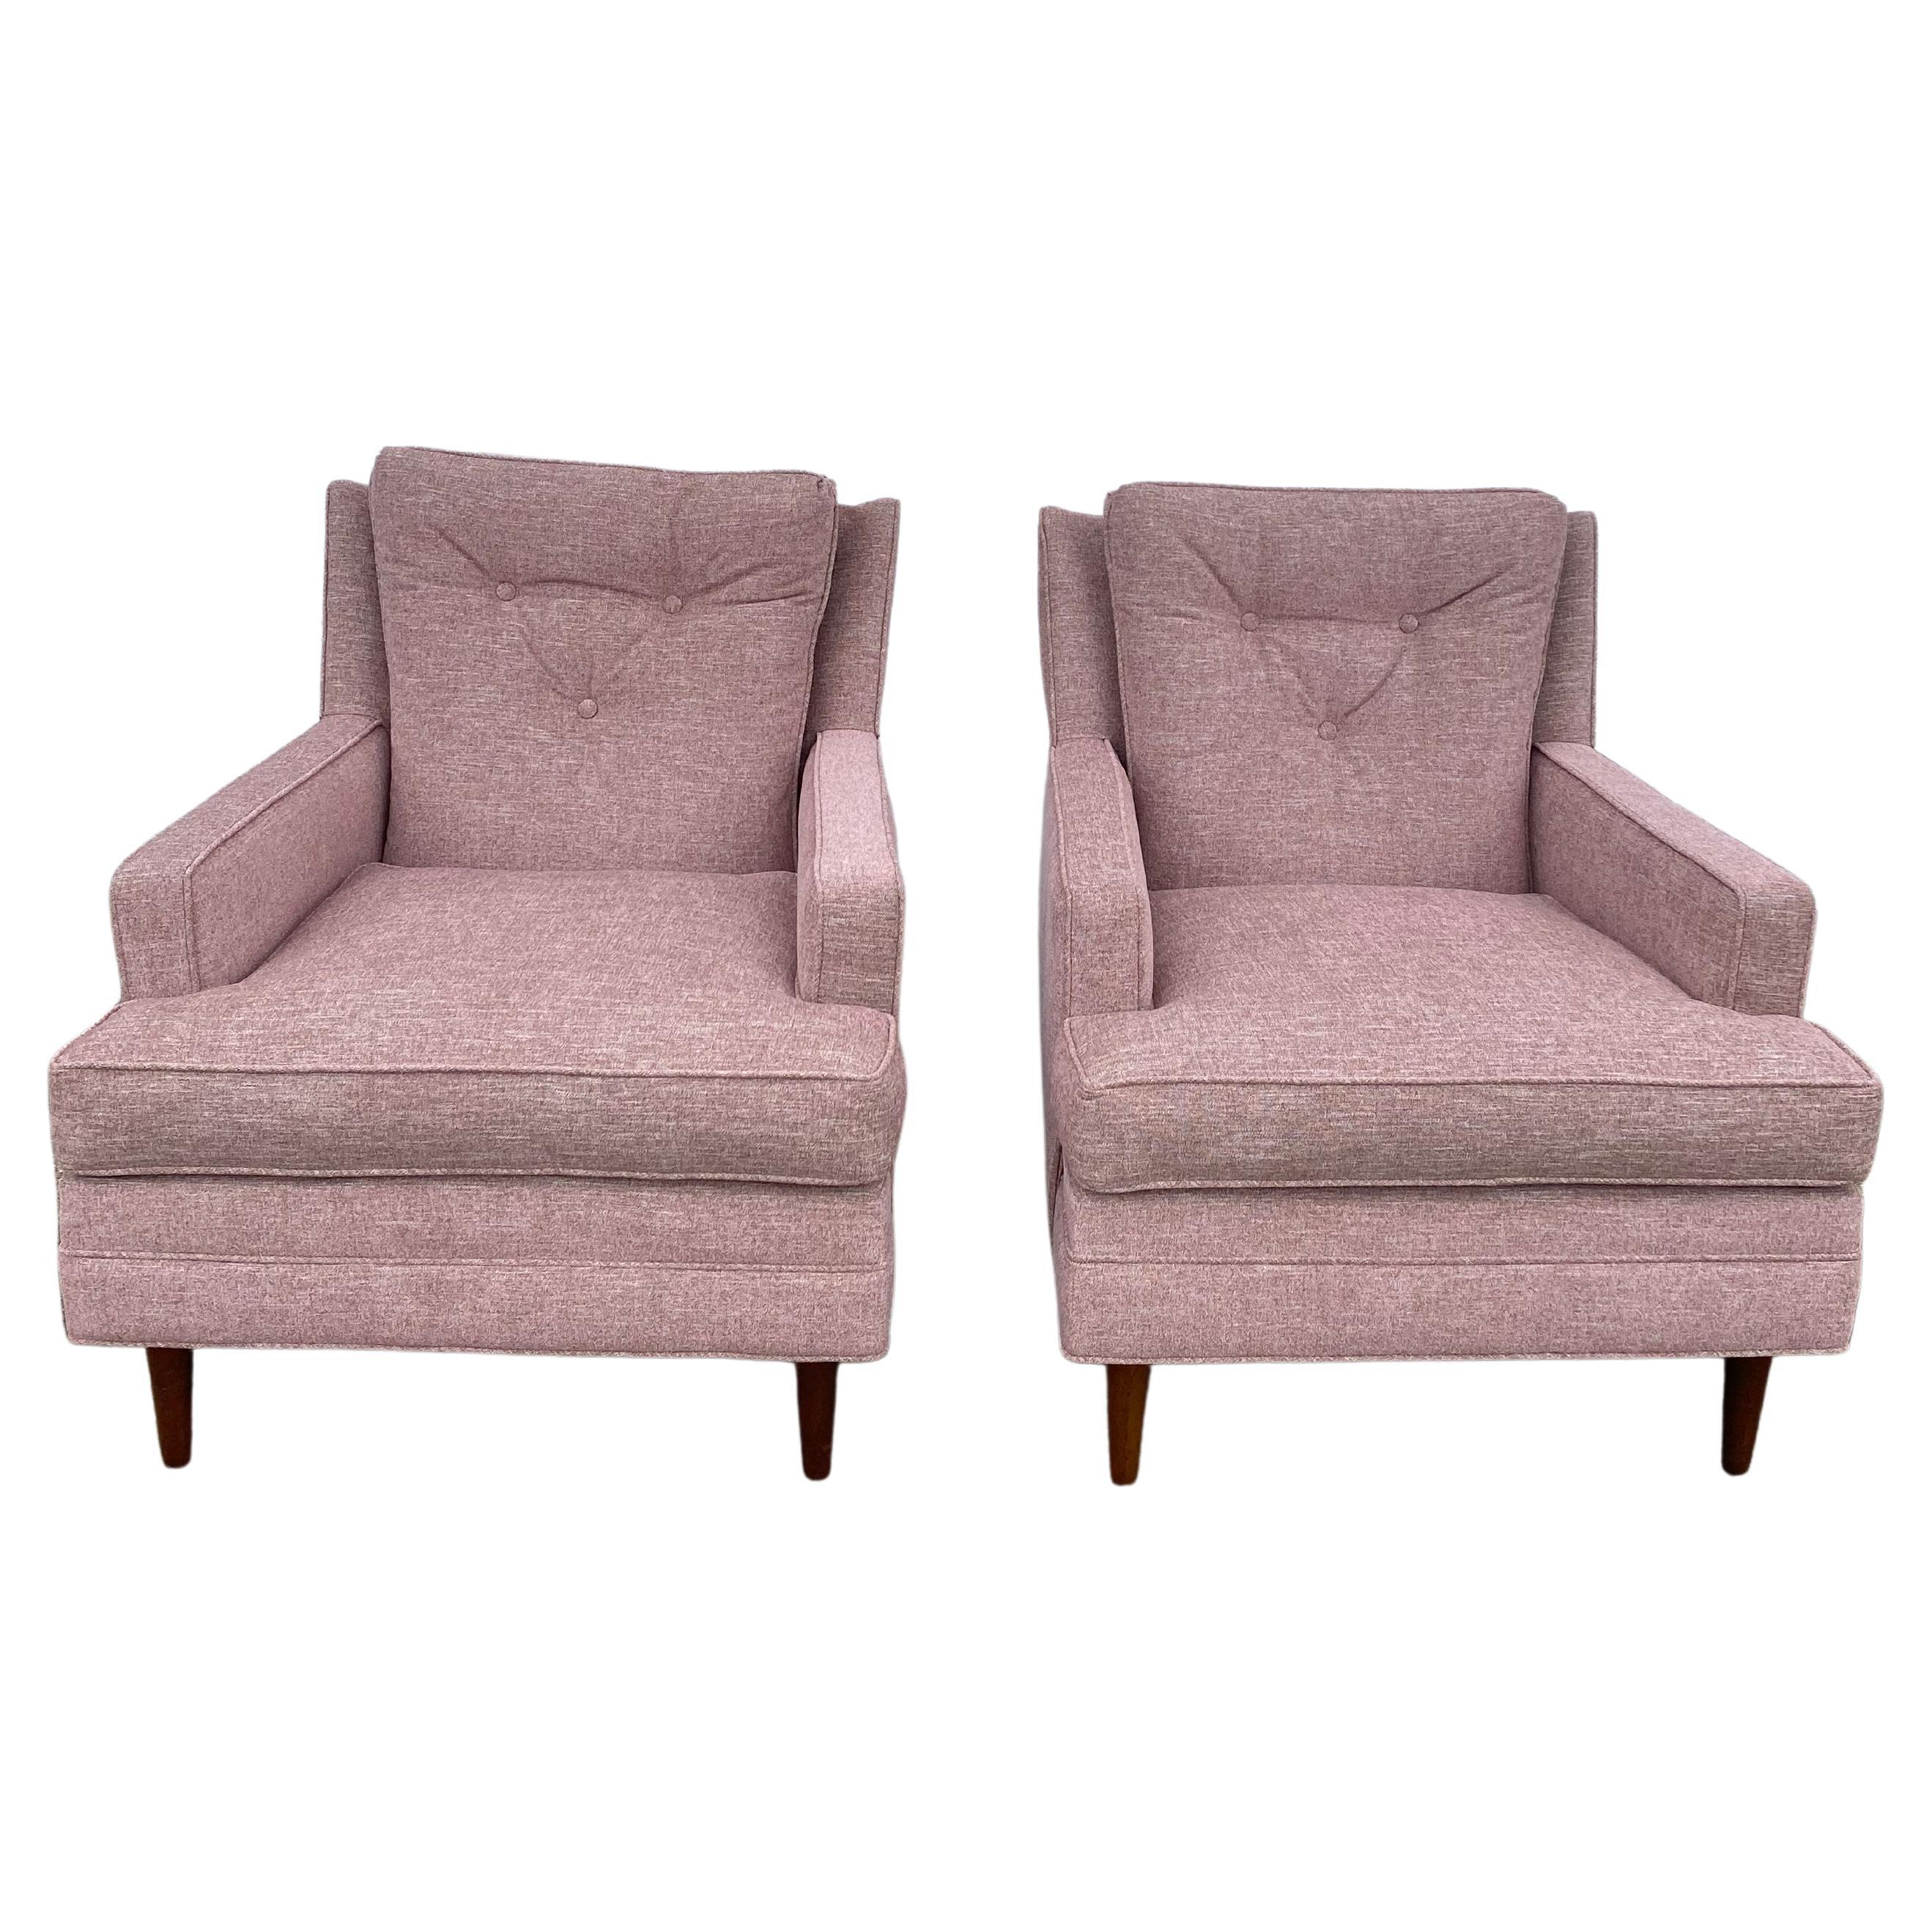 Pair of Reupholstered 1960s Flair Club Chairs by Bernhardt For Sale